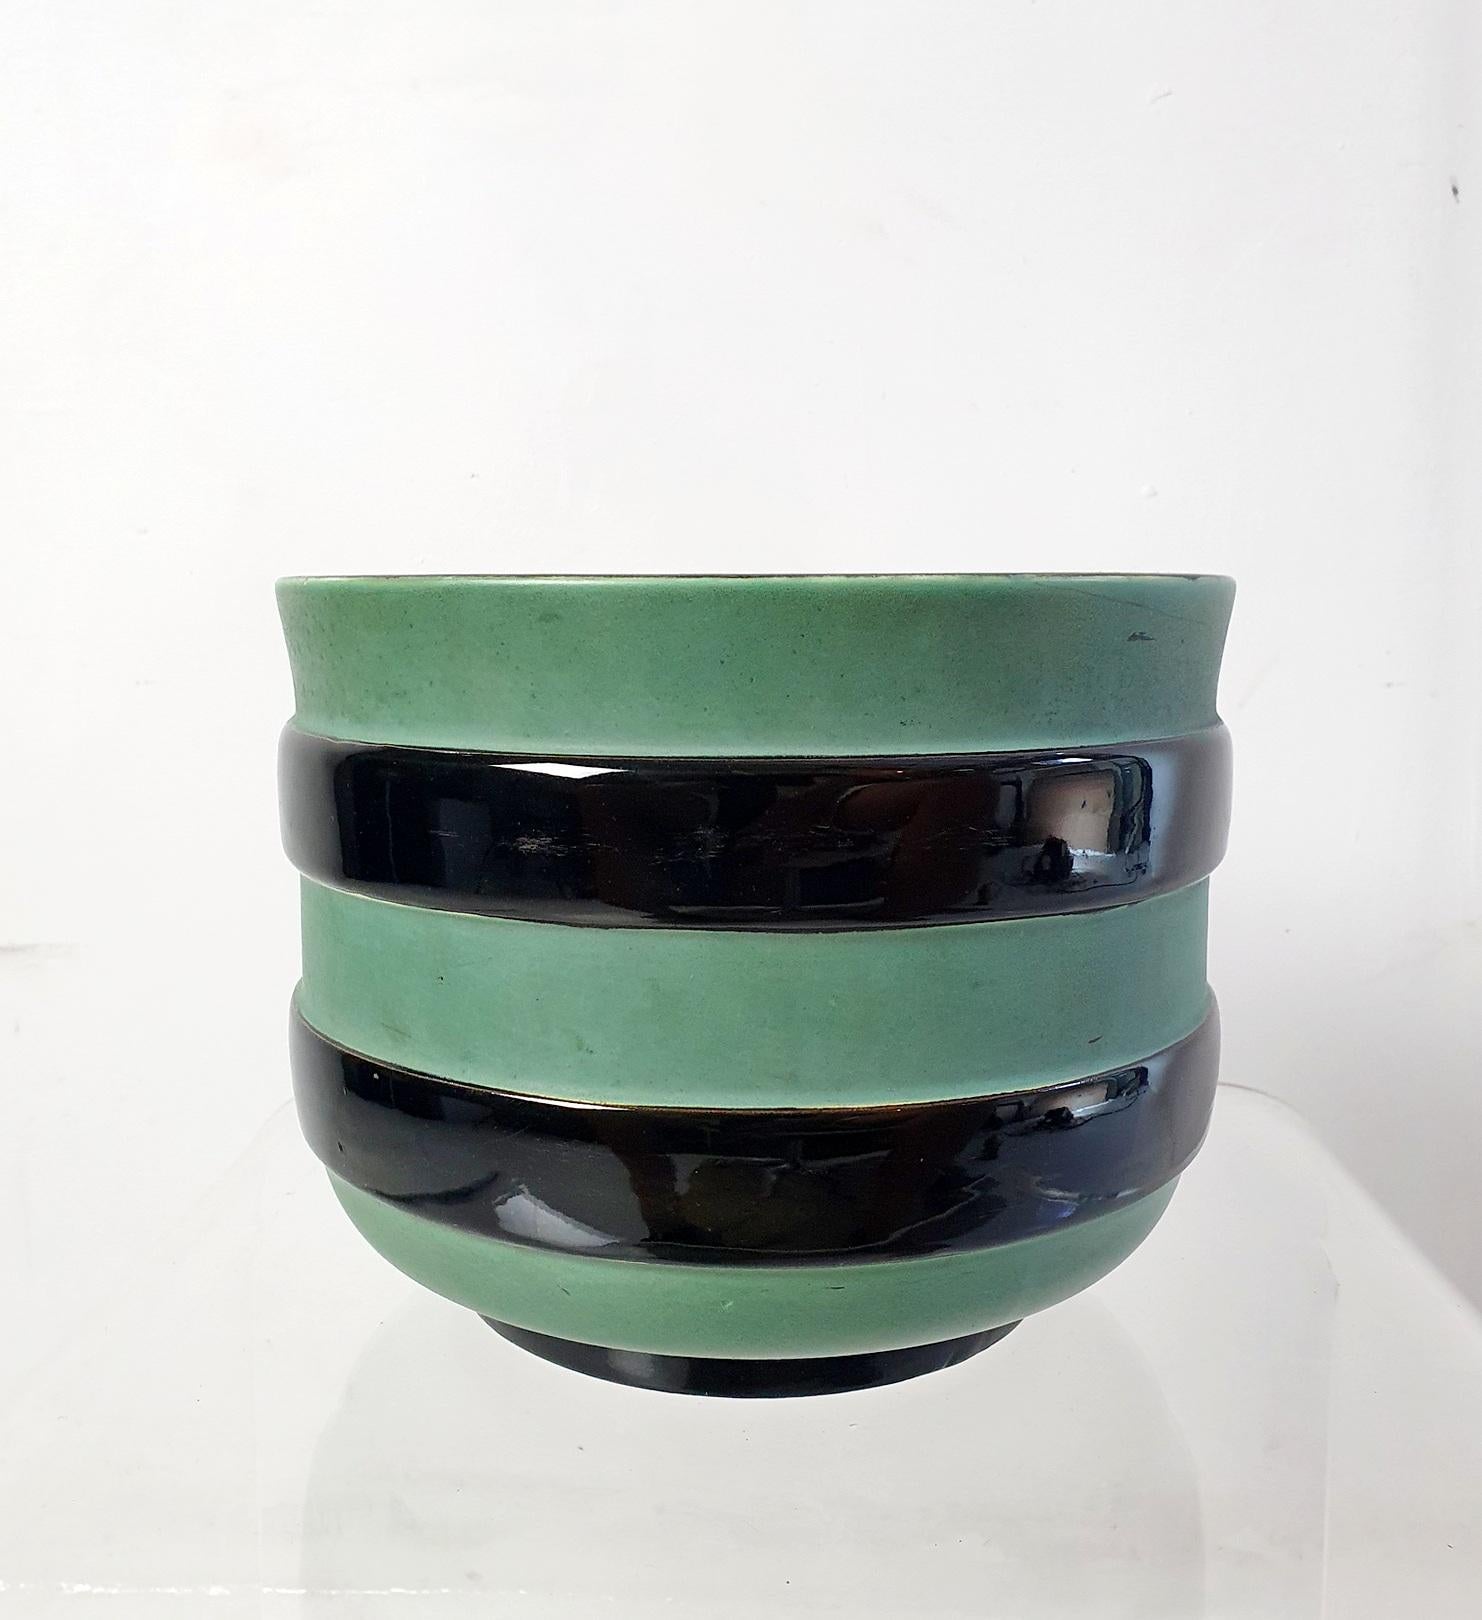 A rare and beautiful striking planter designed by Gio Ponti during the 1930's for Italian manufacturer Richard Ginori, which still is in production today doing collaborations with famous designers such as Luke Edward Hall. 
The art deco planter has